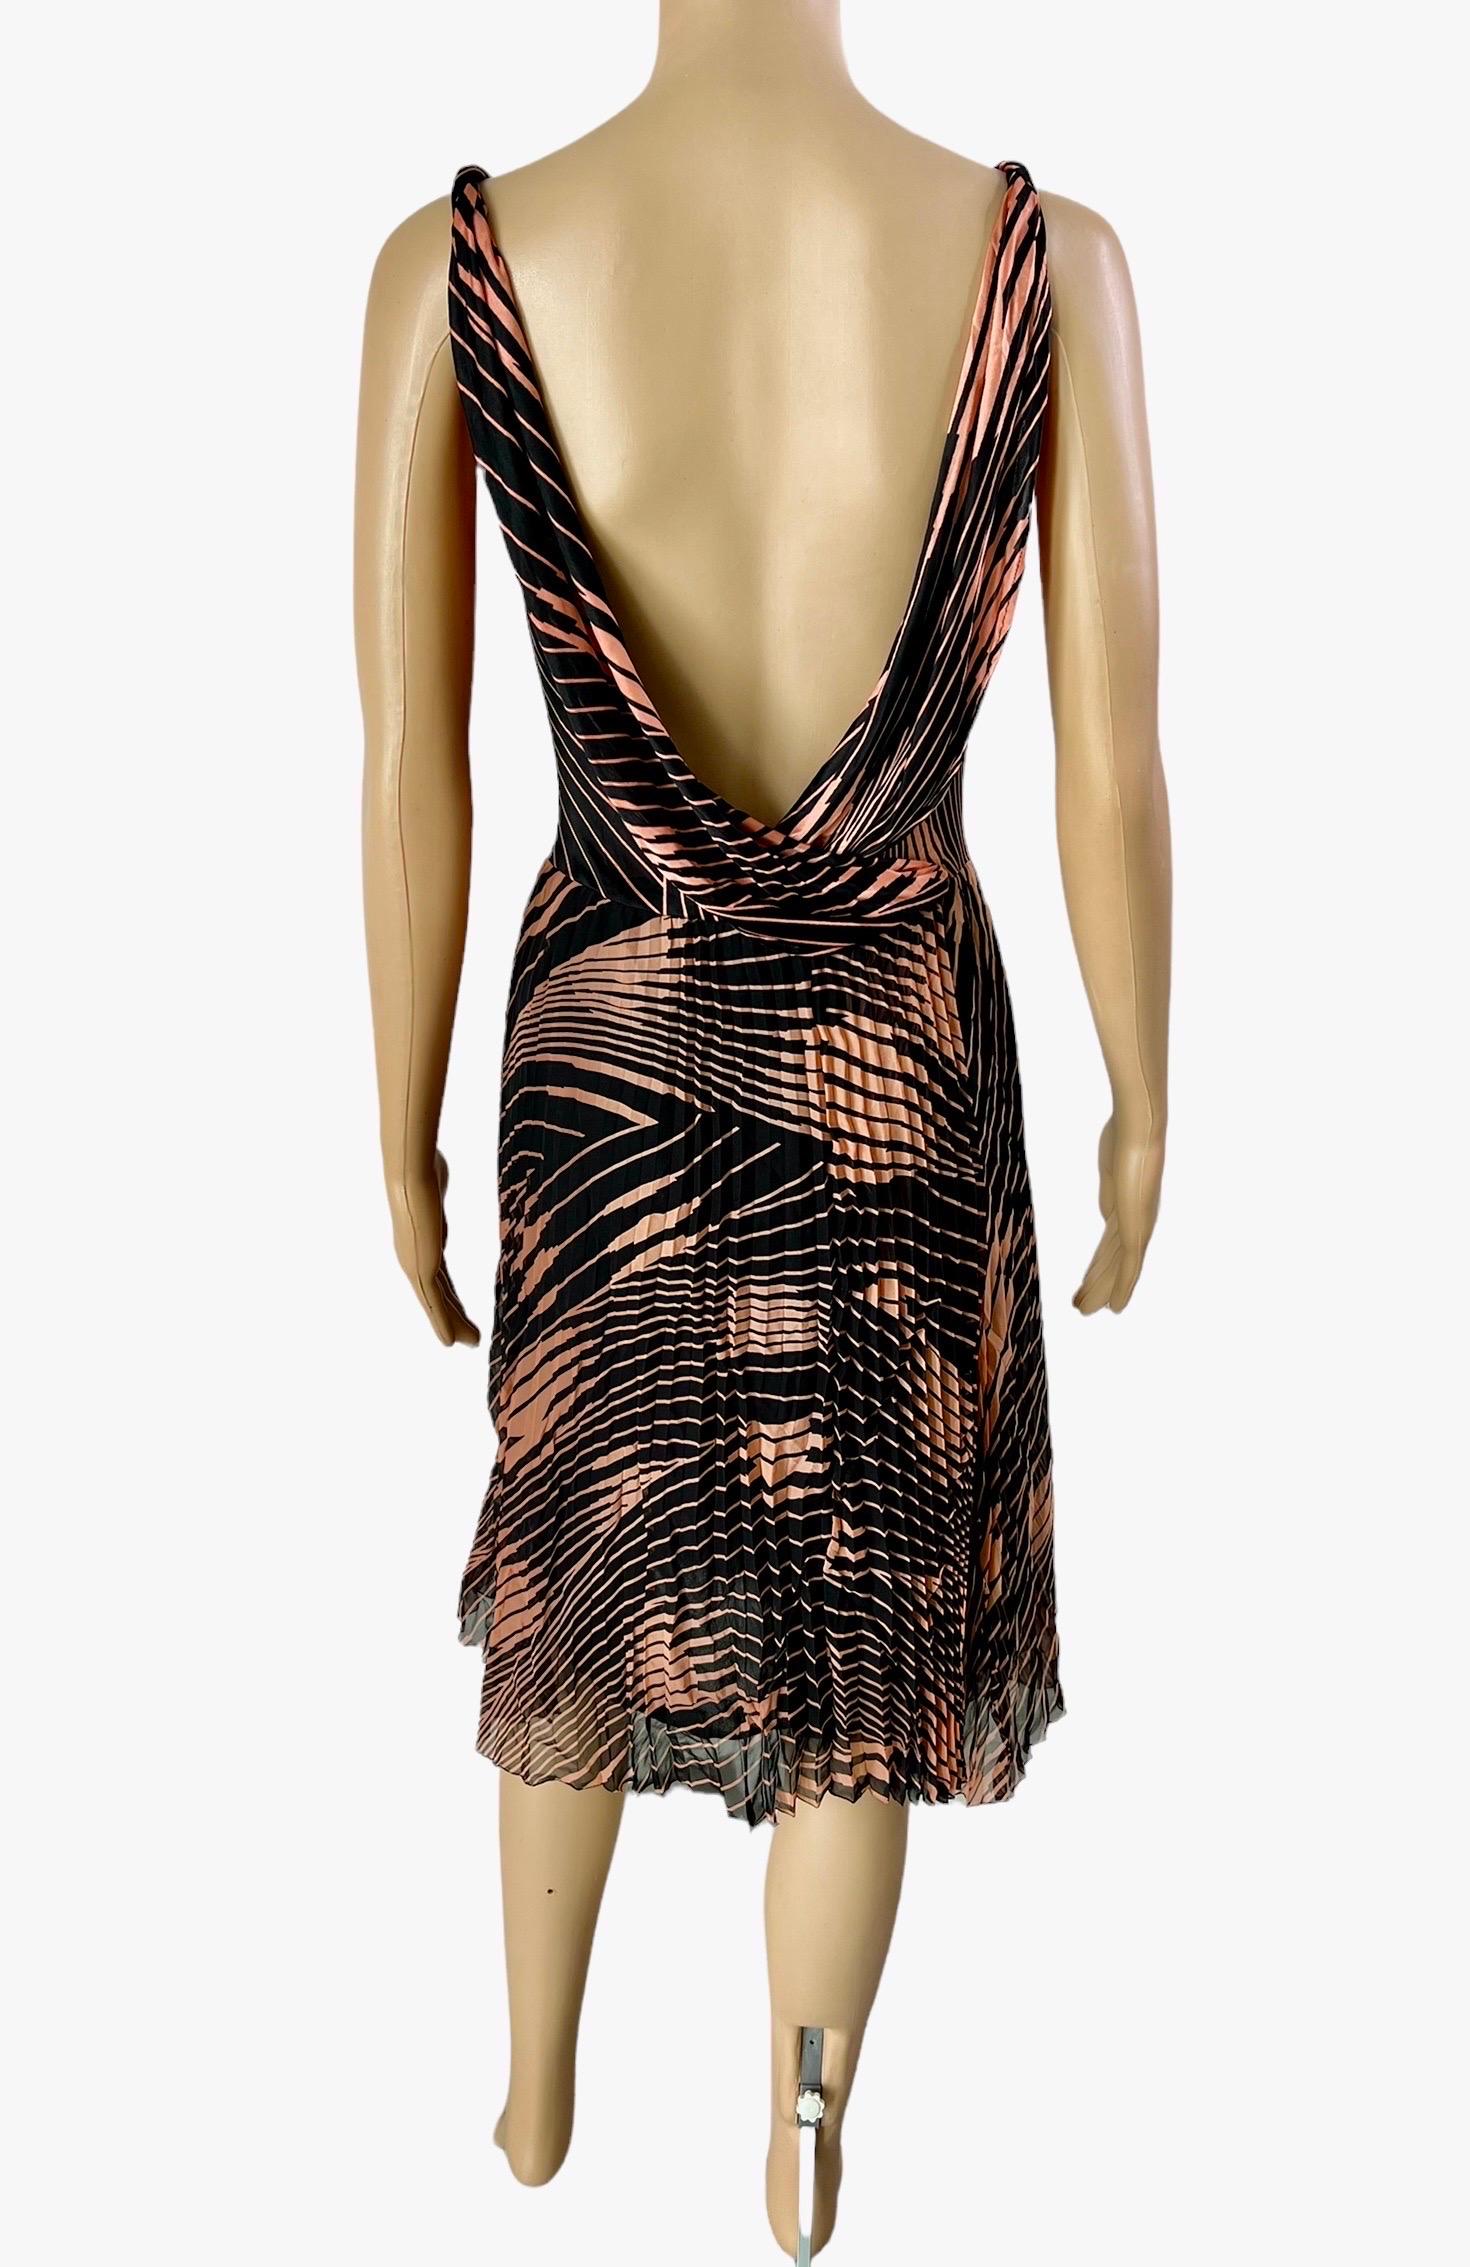 Women's Gianni Versace c.2001 Plunged Bustier Open Back Geometric Abstract Print Dress For Sale